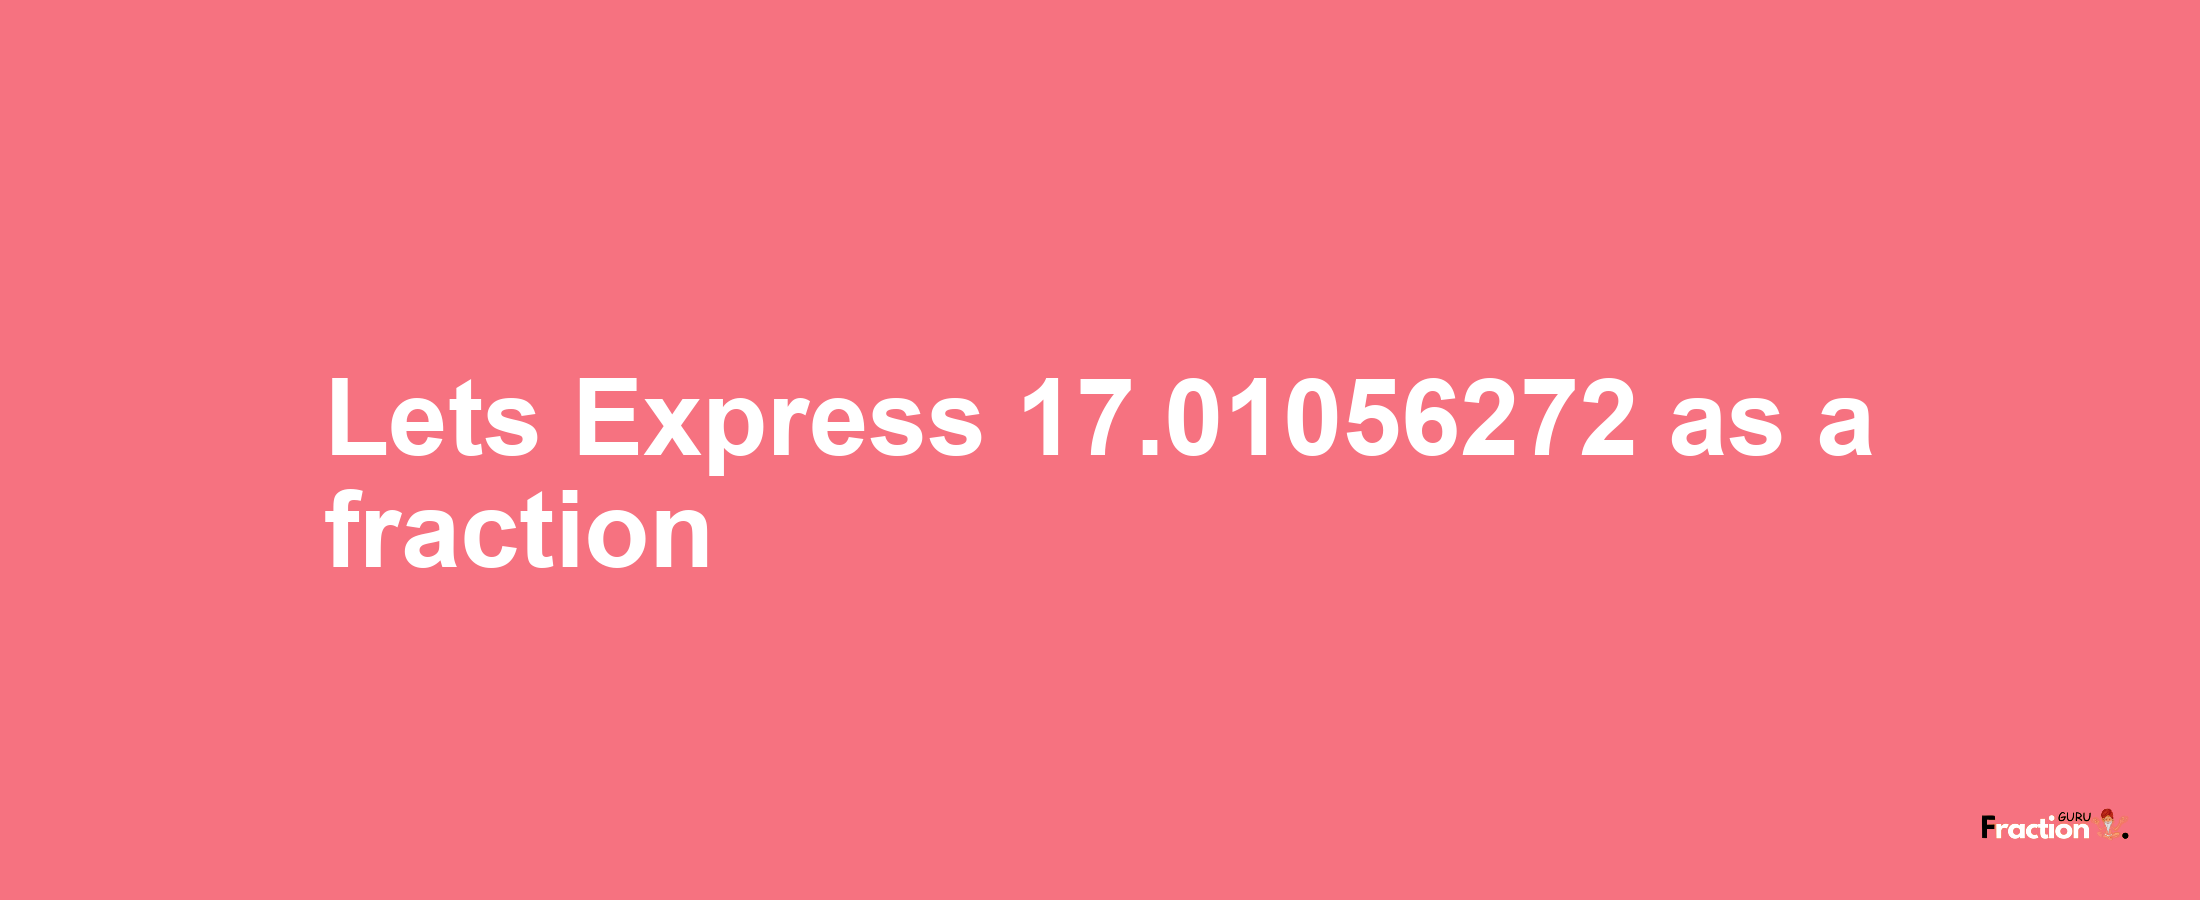 Lets Express 17.01056272 as afraction